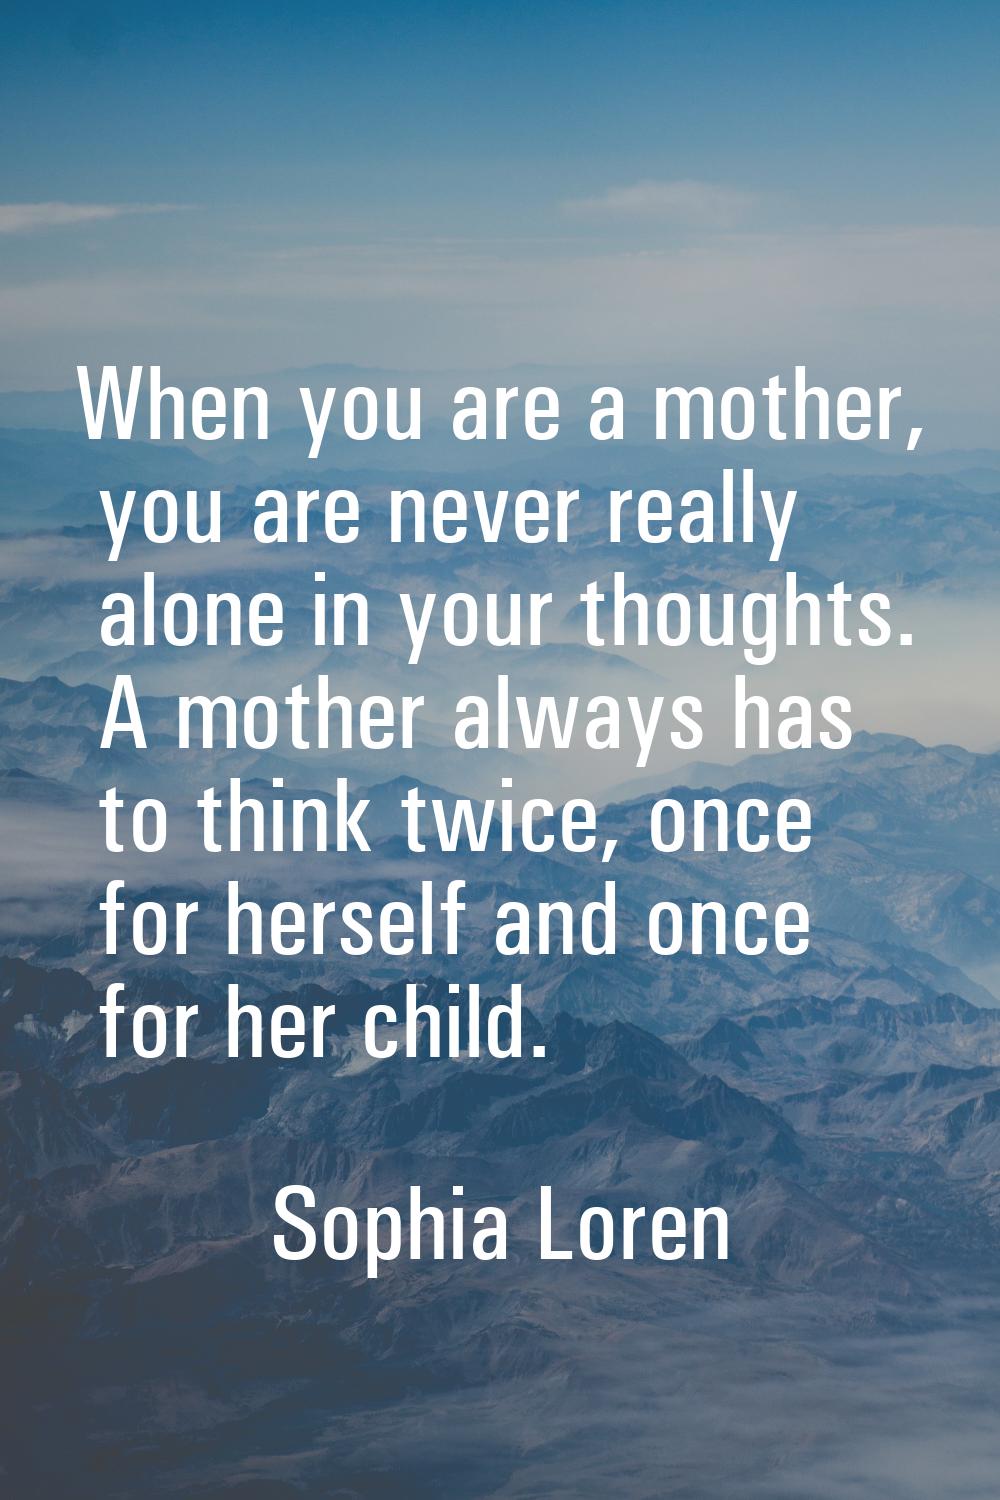 When you are a mother, you are never really alone in your thoughts. A mother always has to think tw